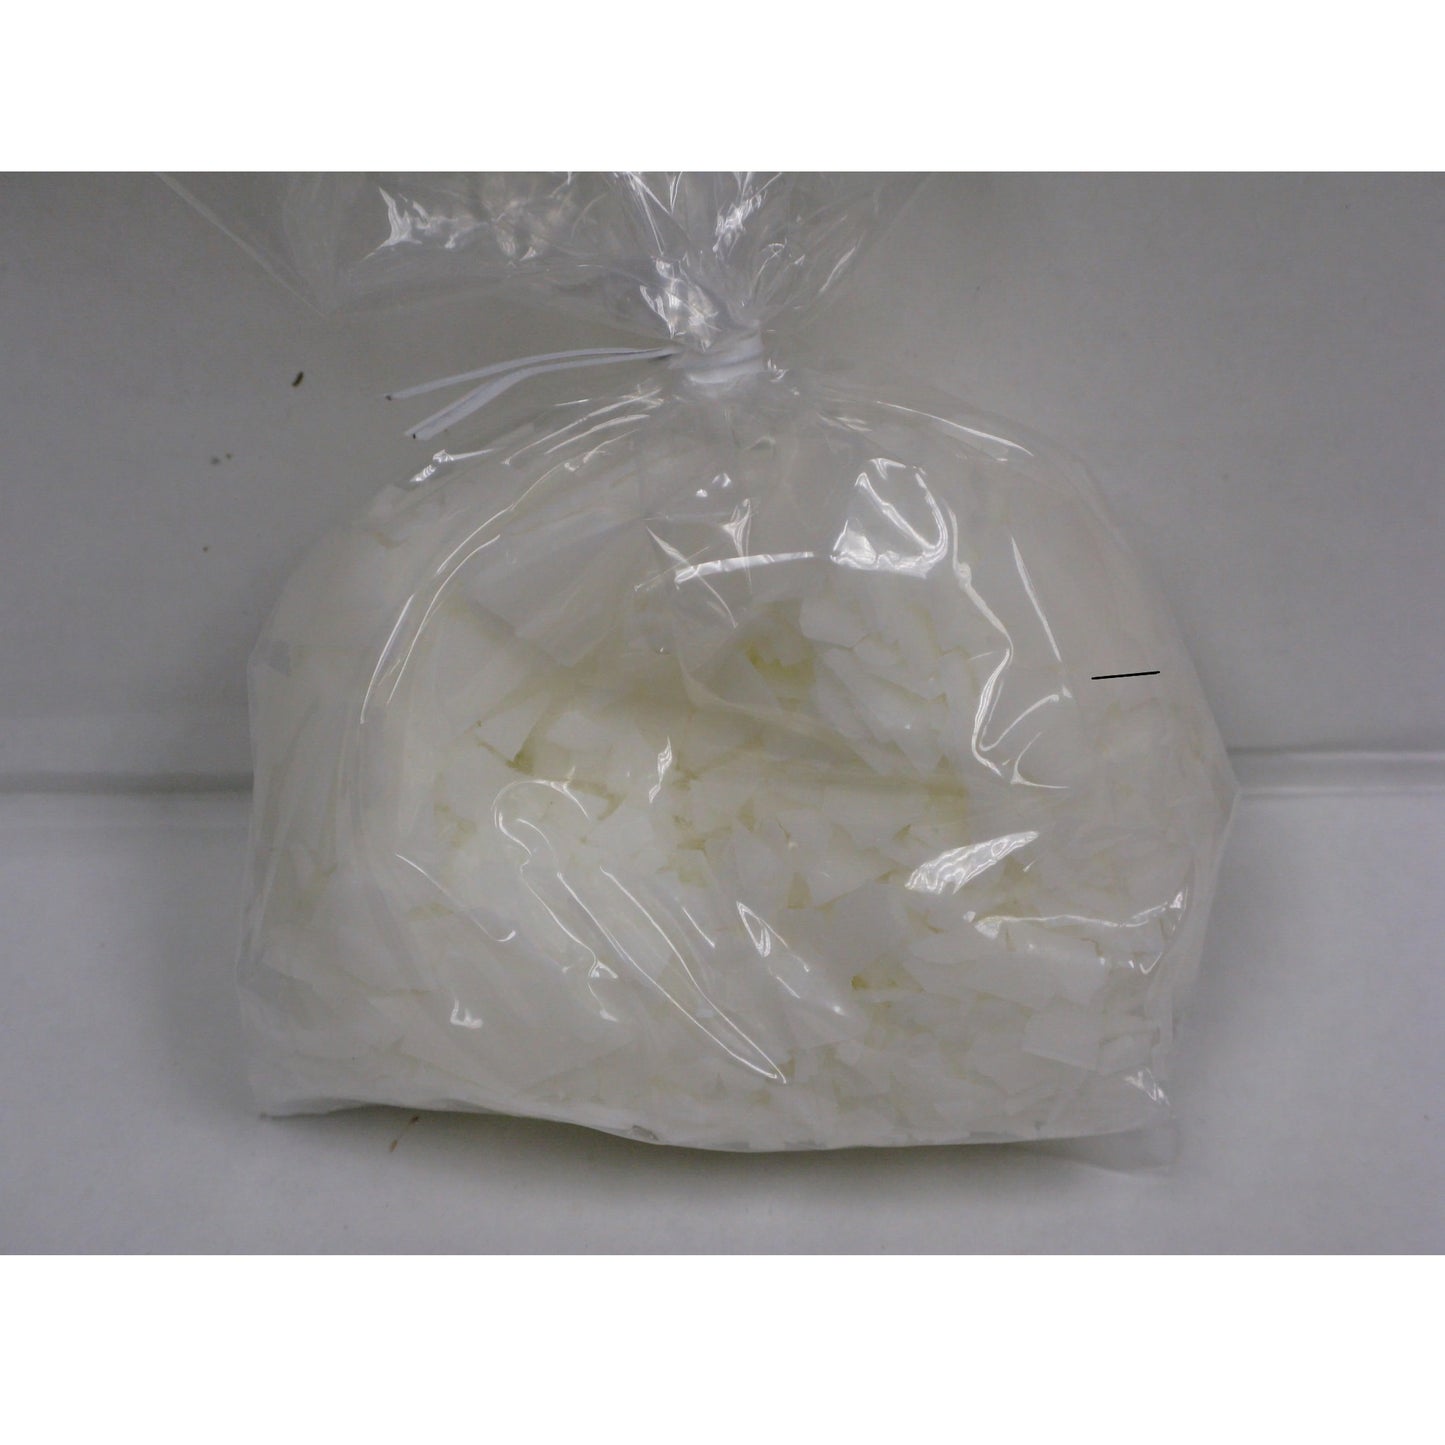 Bag of Paramount Crystals for Chocolate Making - A clear plastic bag filled with white flaky paramount crystals, essential for thinning out chocolate and candy coatings for a smooth and glossy finish in confectionery chocolate